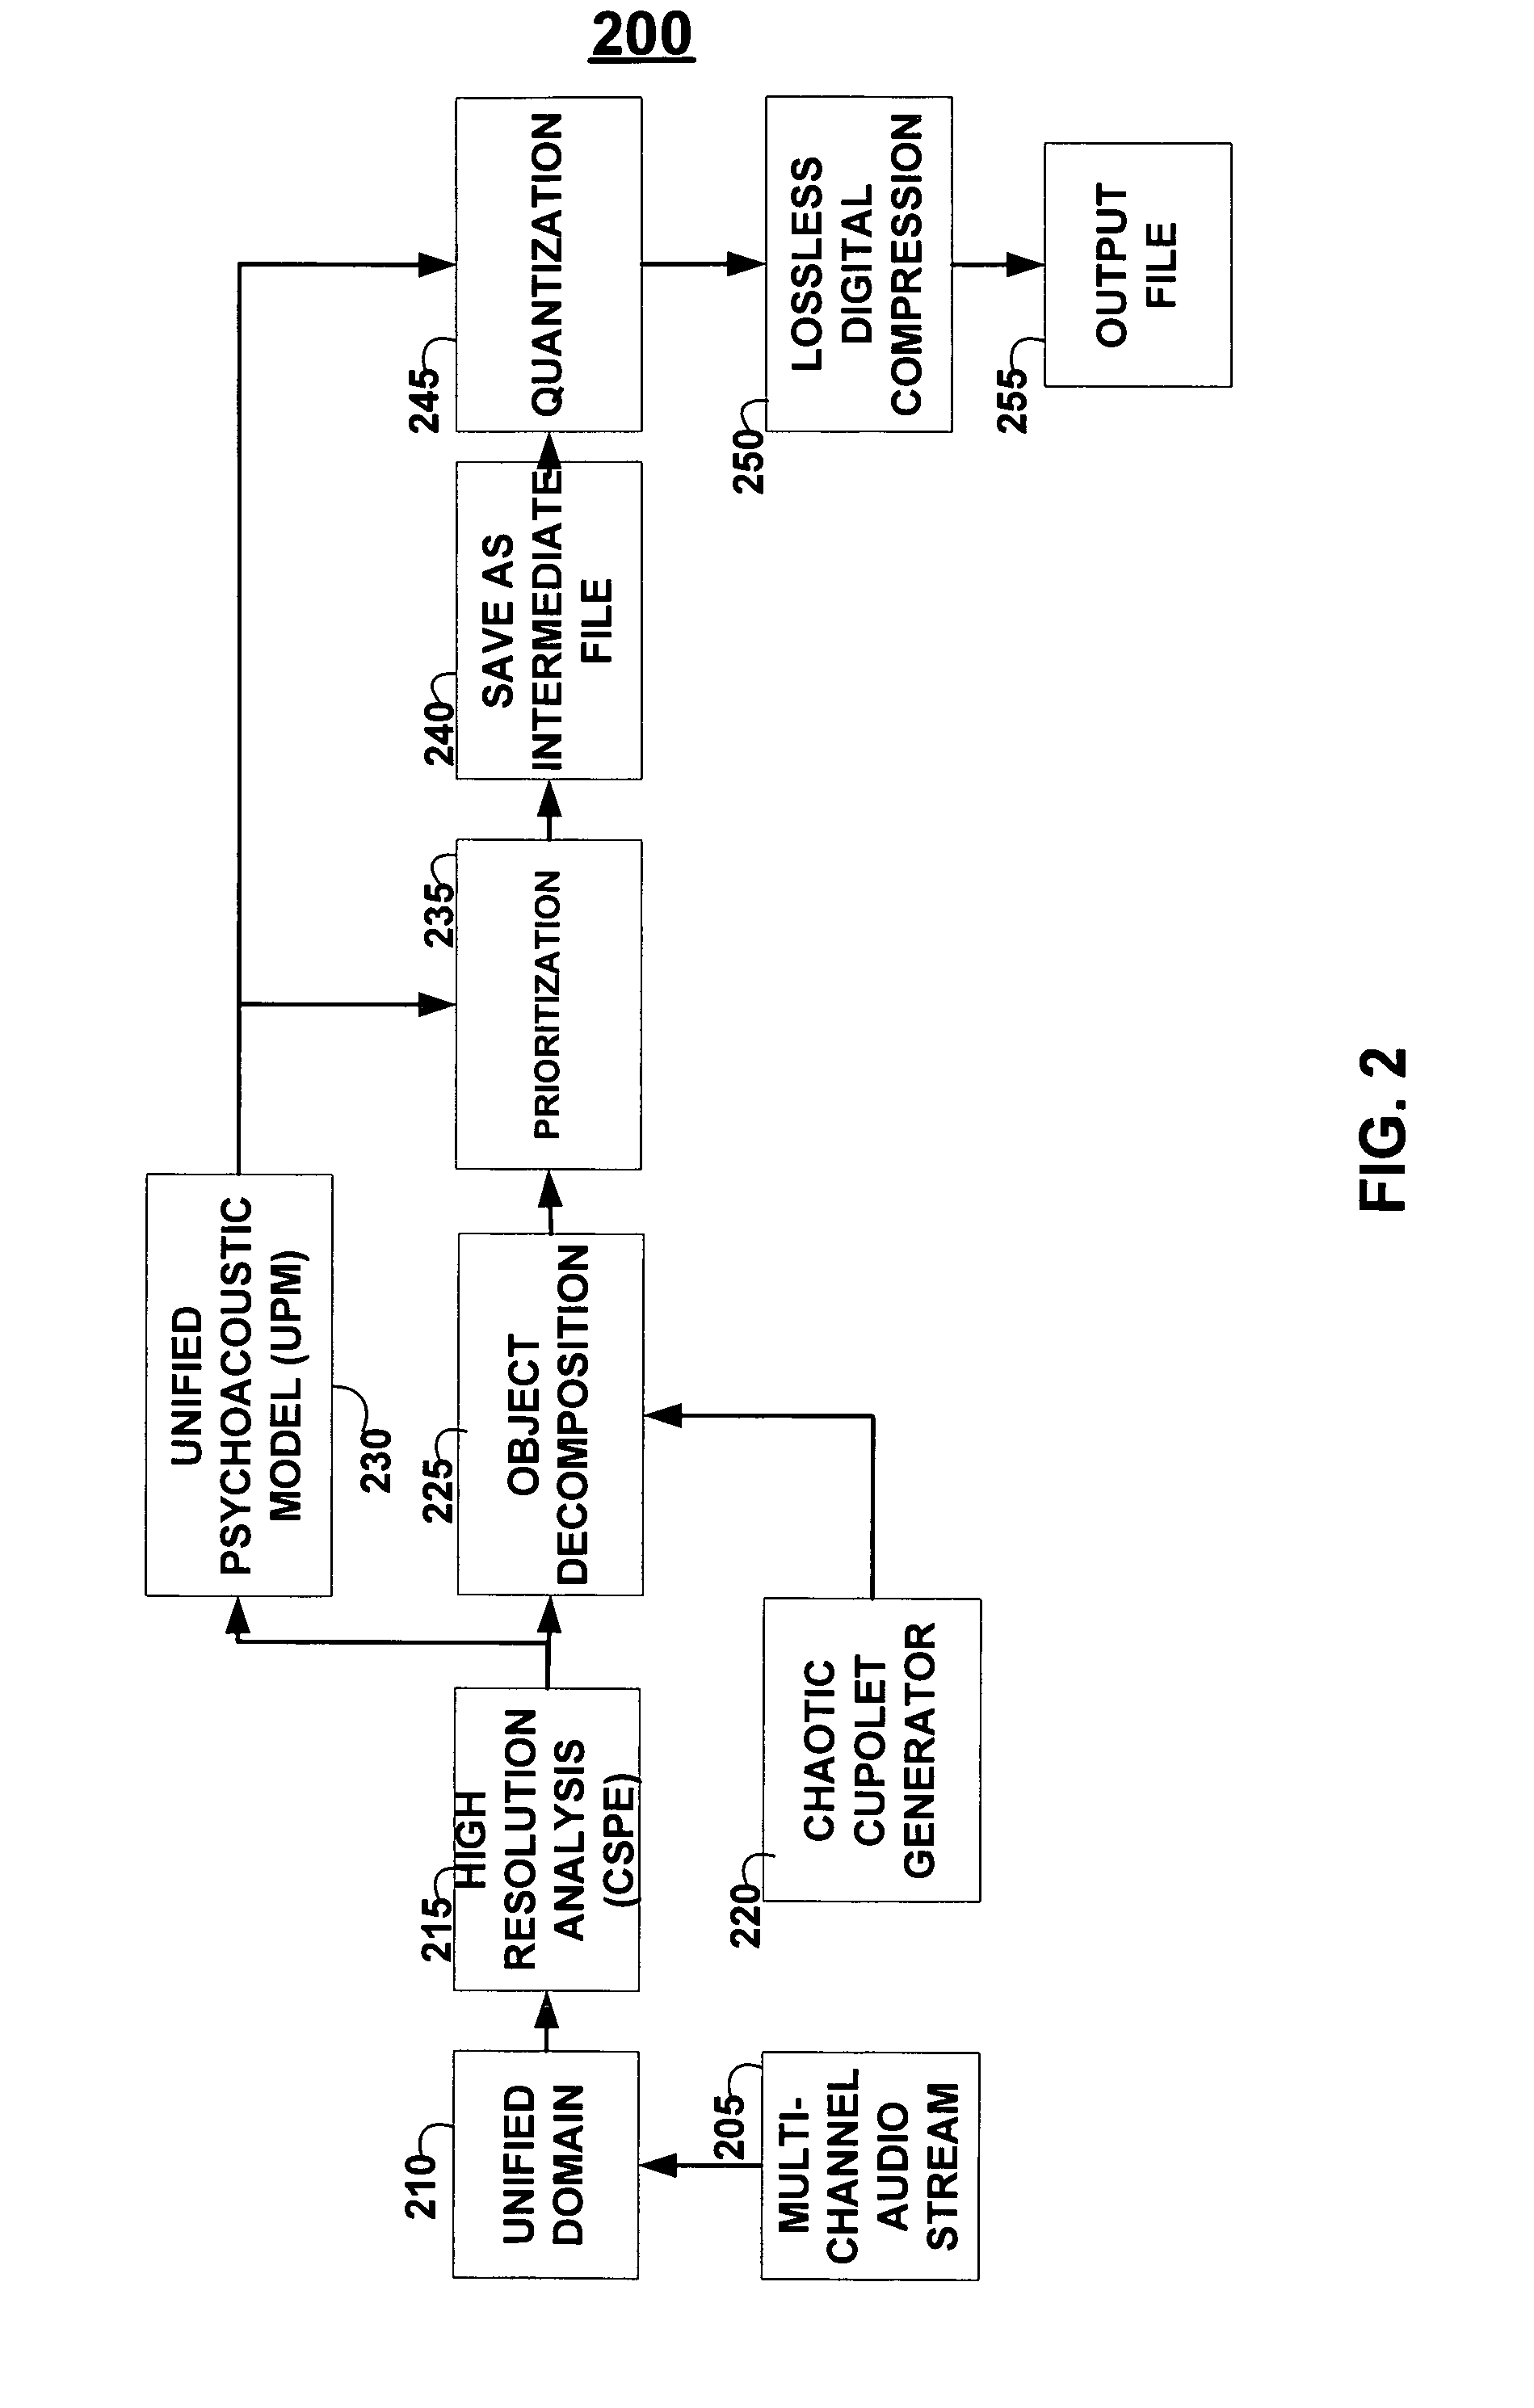 Systems and methods for high resolution signal analysis and chaotic data compression